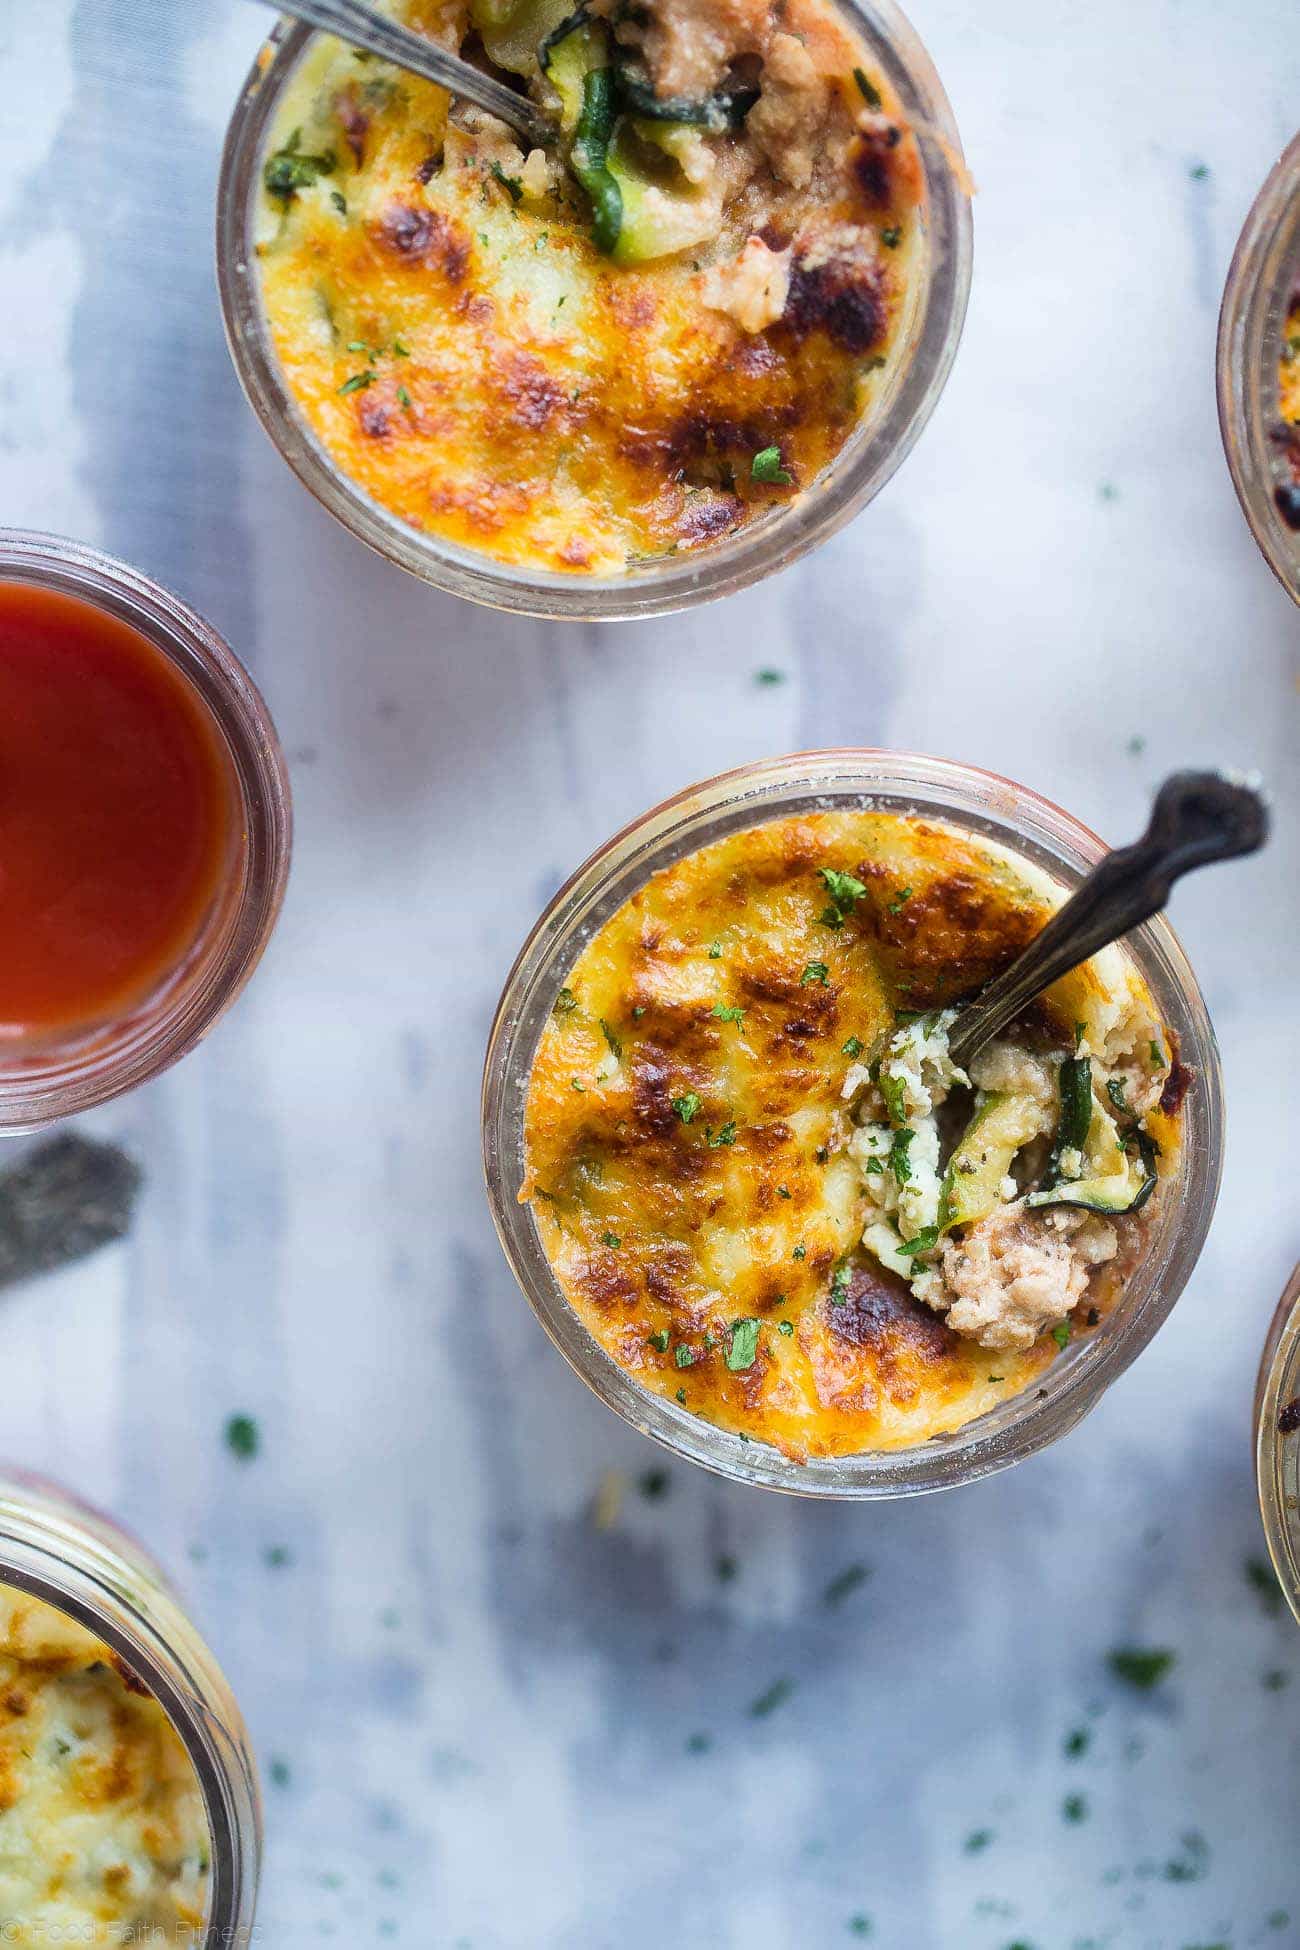 Mason Jar Zucchini Lasagna - The perfect, portable healthy meal that's great for meal prep! They're low carb, gluten free, packed with protein and only 250 calories! | Foodfaithfitness.com | @FoodFaithFit